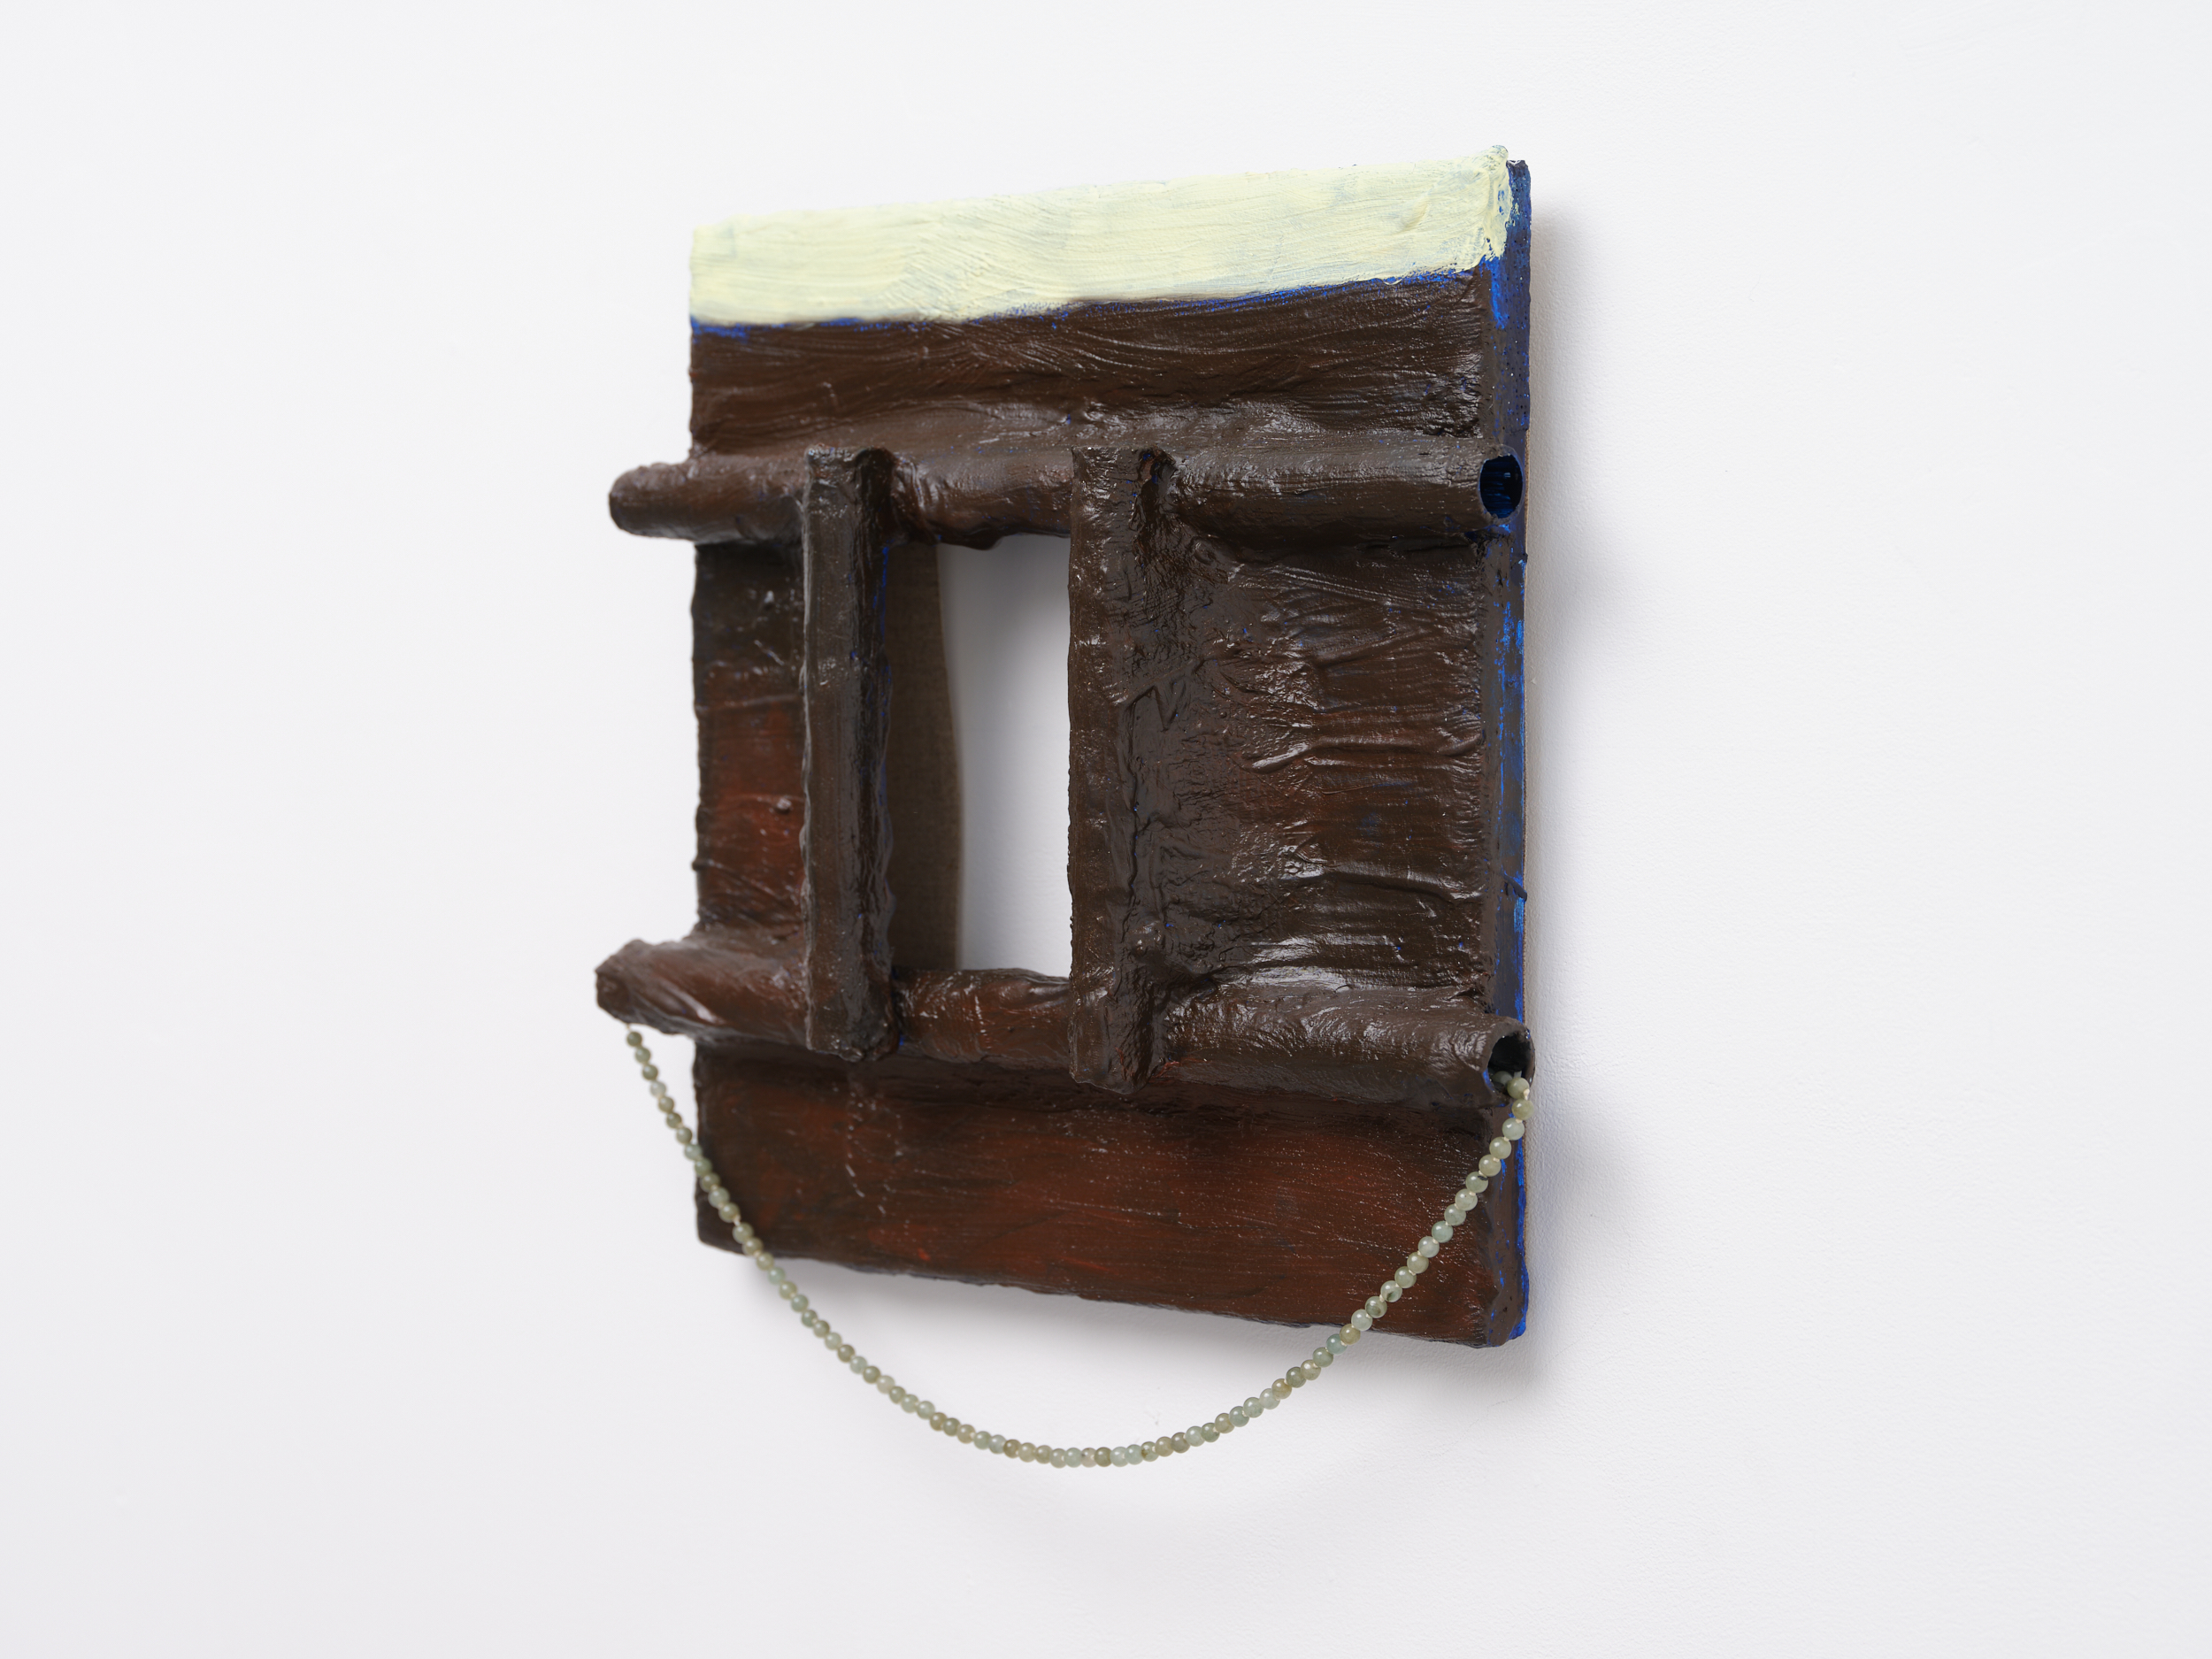 Sculptural painting by Rachel Walters in Plaster bandage, plumbers pipe, oil and necklace on stretcher titled Wishing. Well.